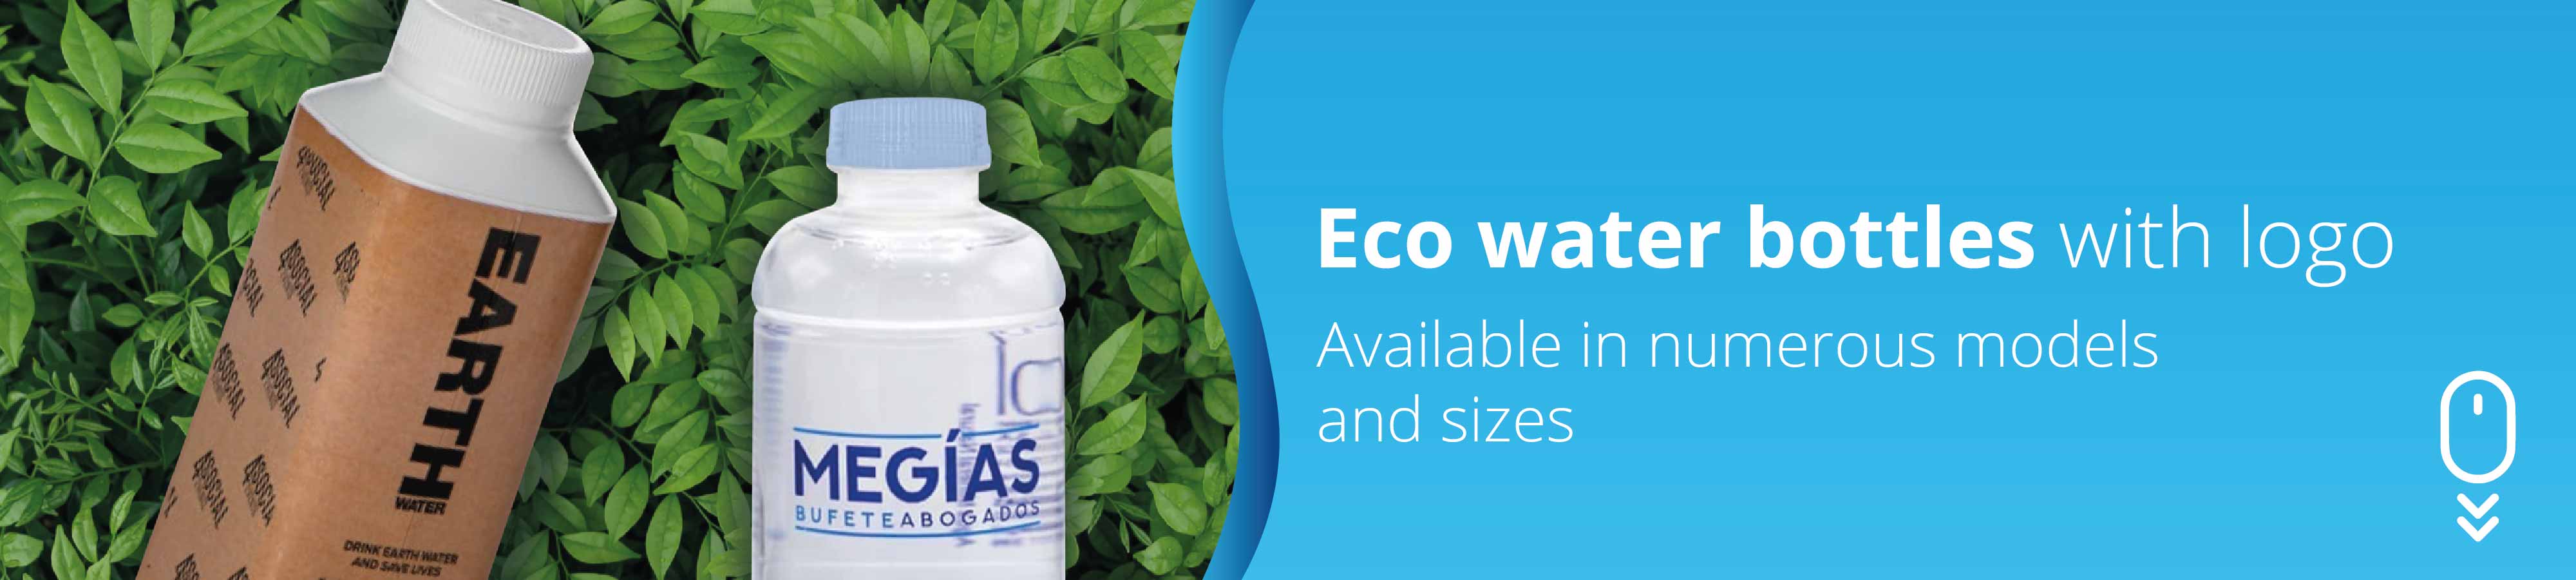 Printed-promotional-eco-water-bottles